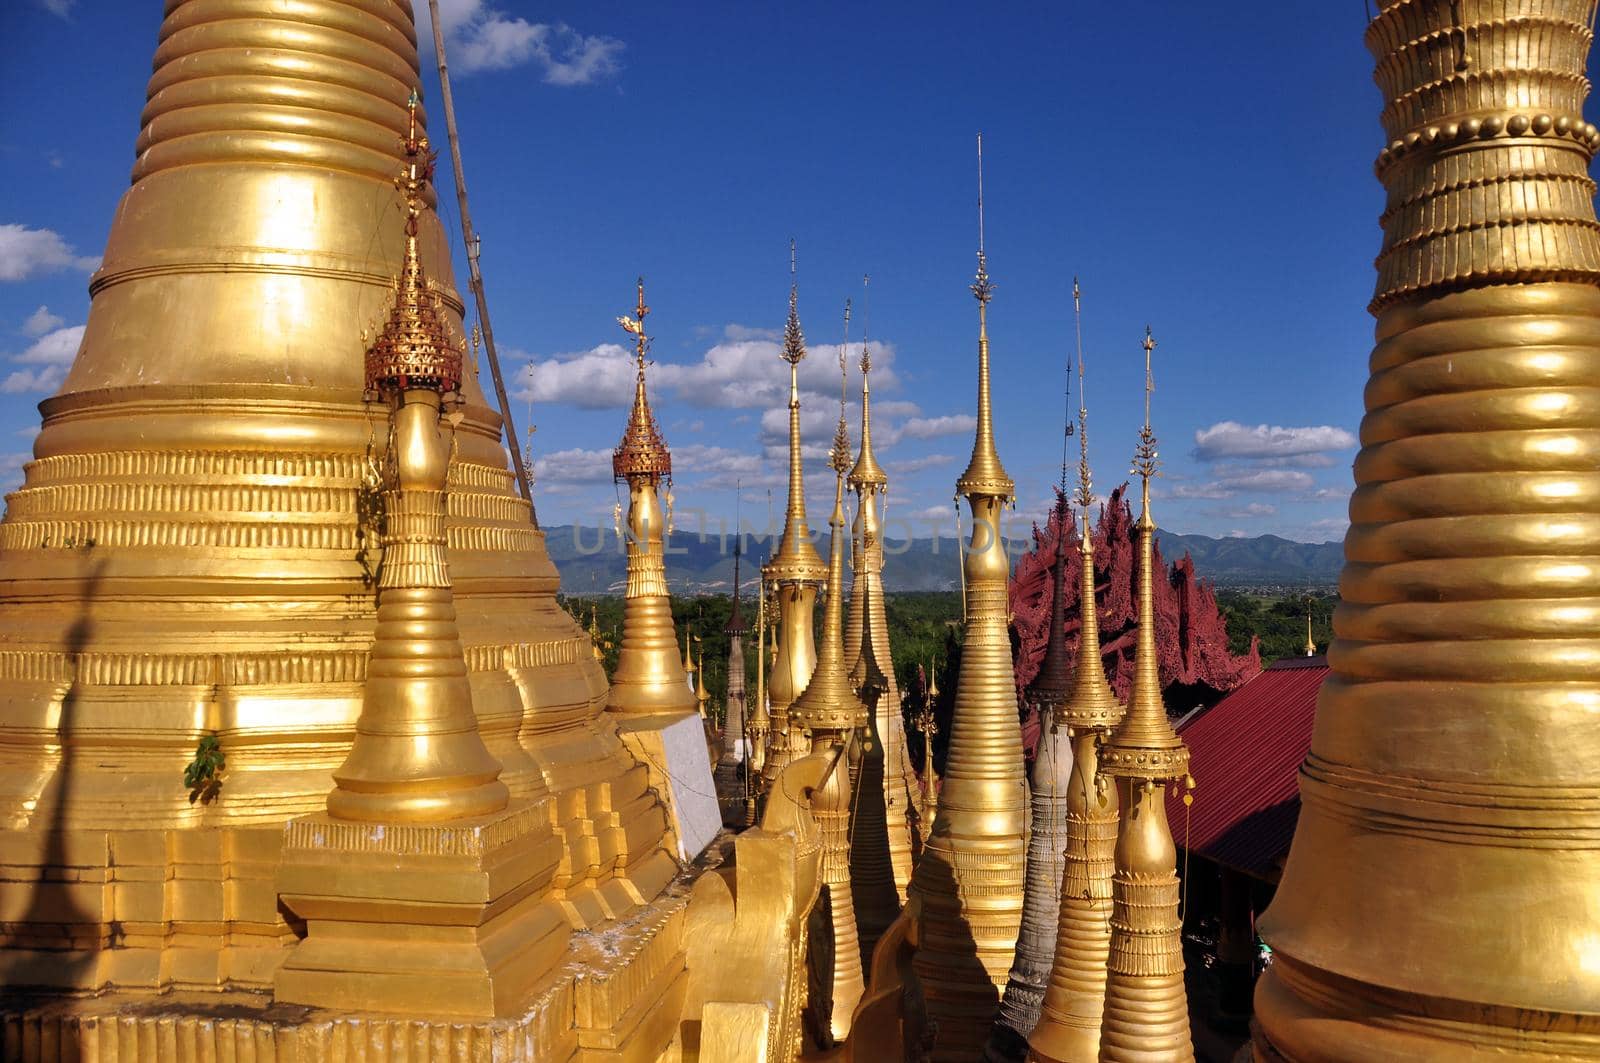 Exterior of exotic temple with stupas and payas, From below shot of golden bright stupas of temple on lake Inle under blue sky, Myanmar. Sacred place.